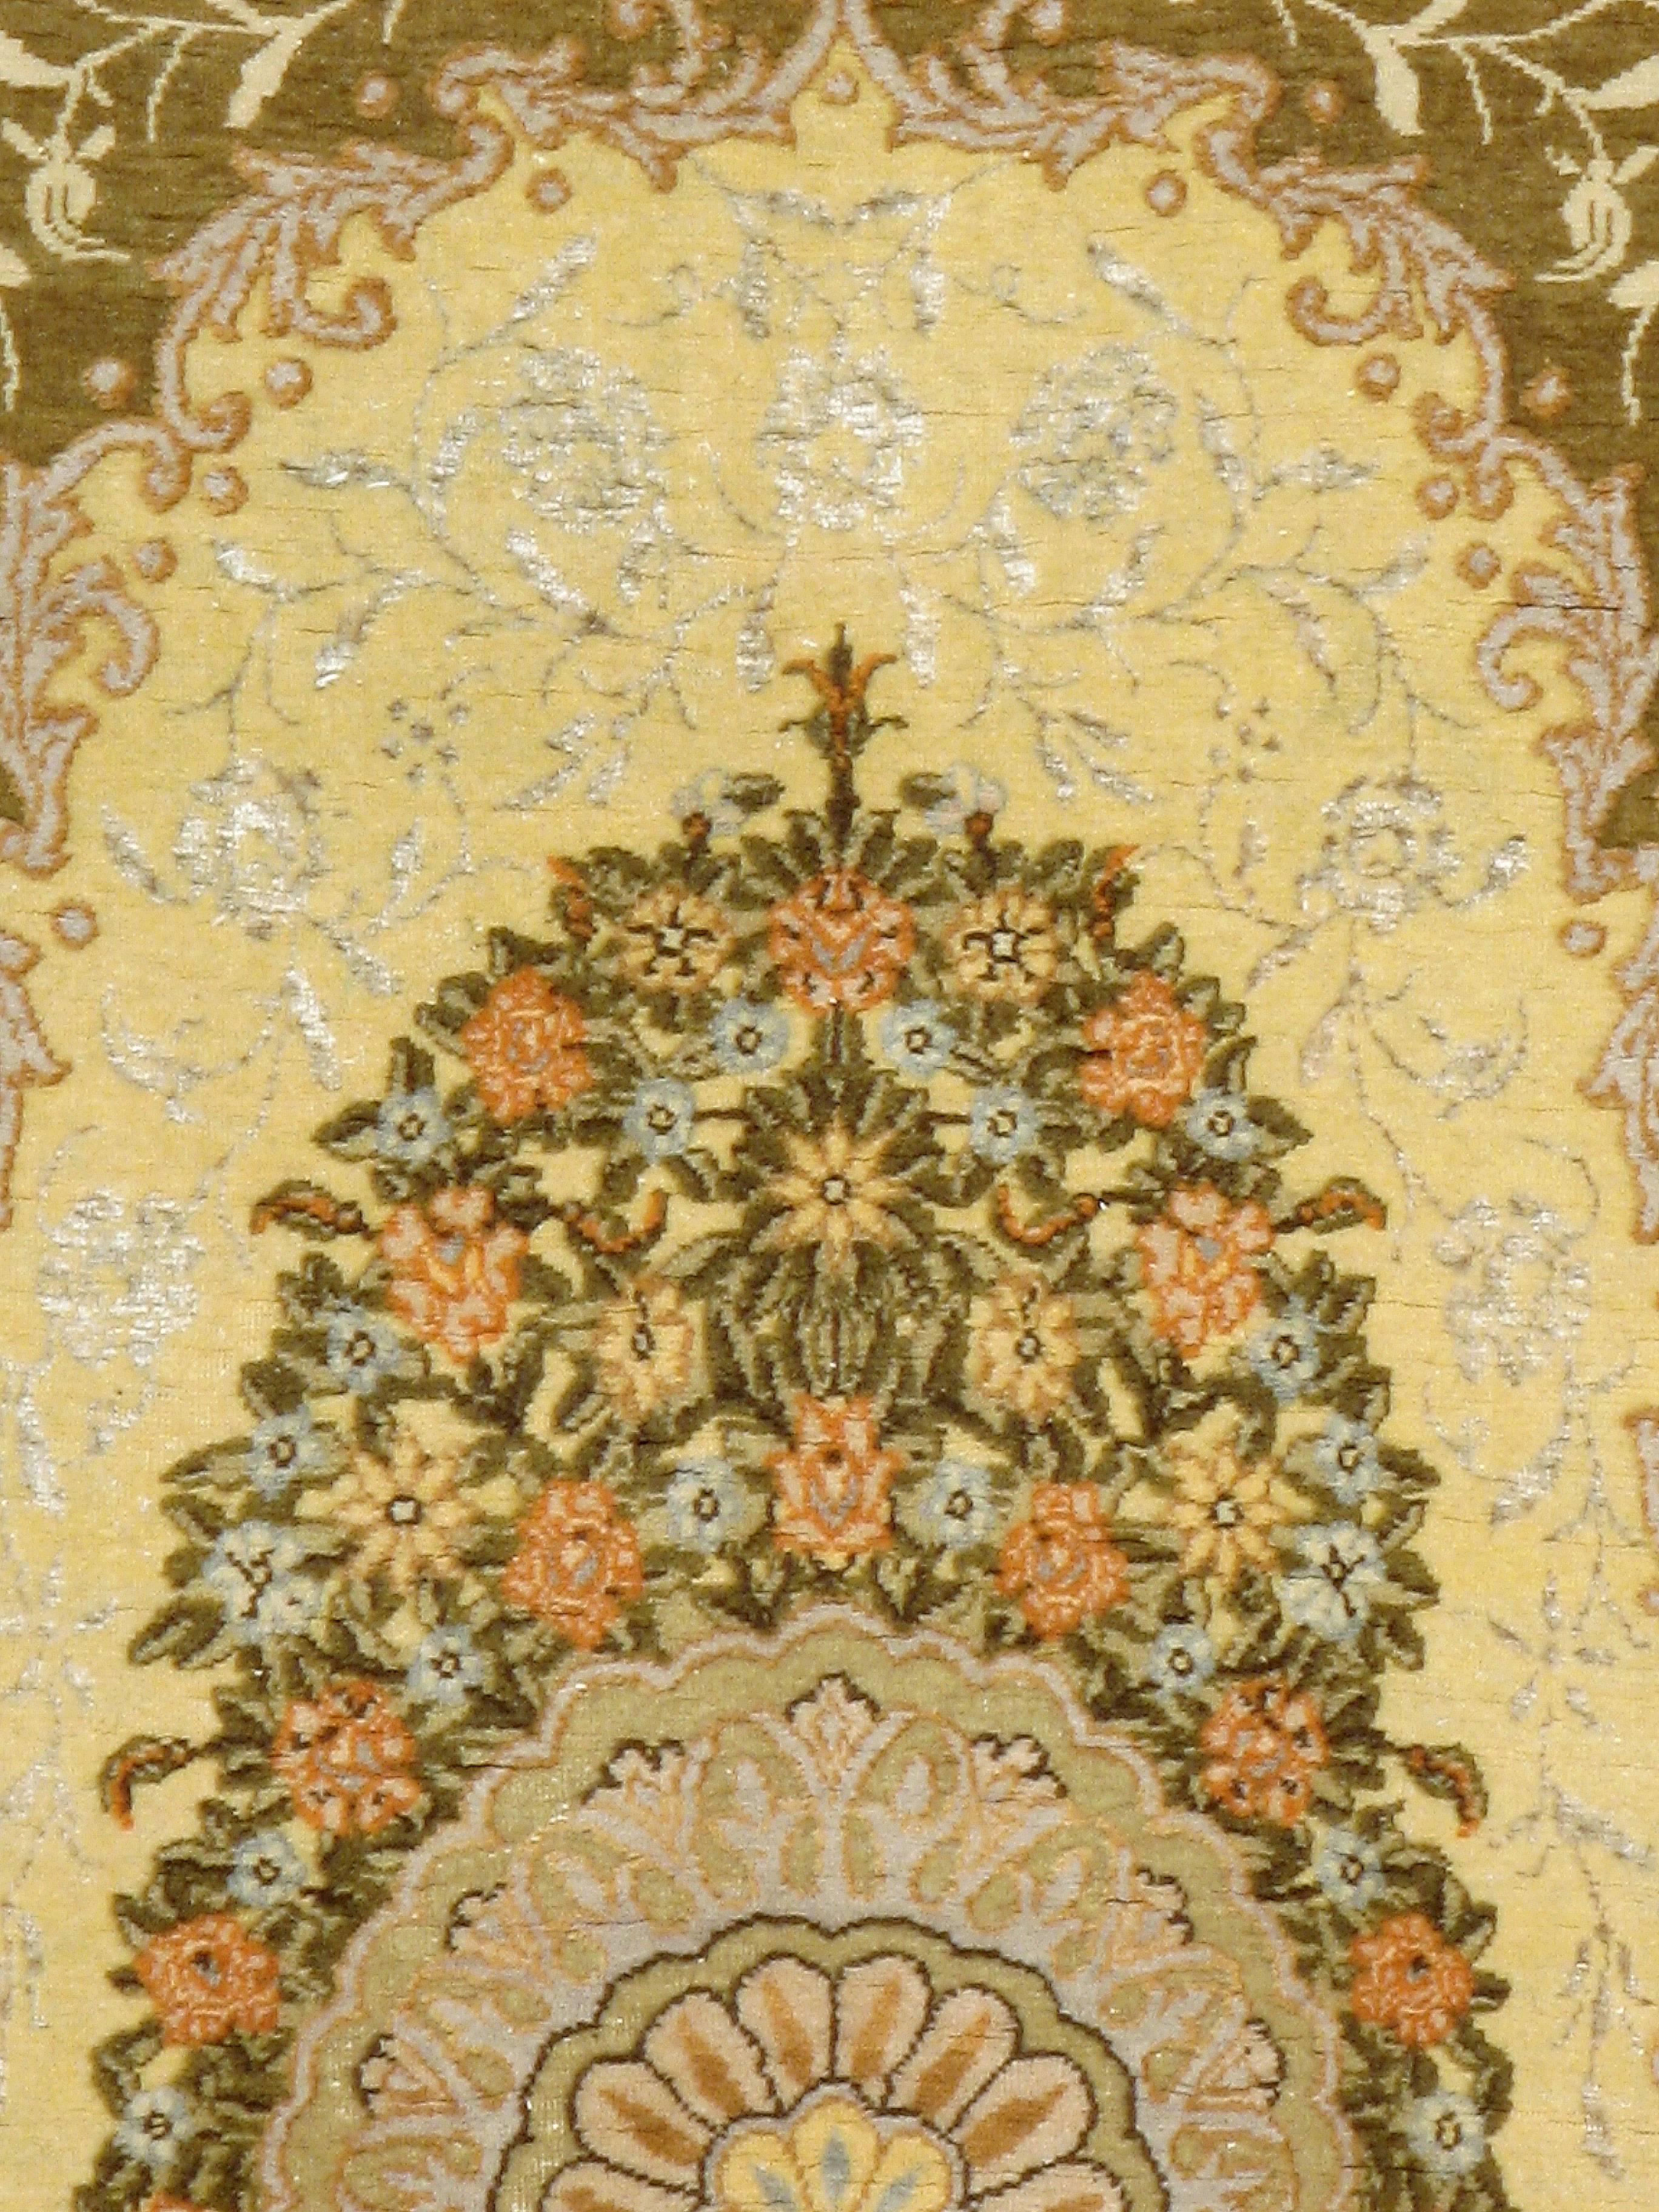 A vintage Turkish Herekeh carpet from the mid-20th century with silk highlights.